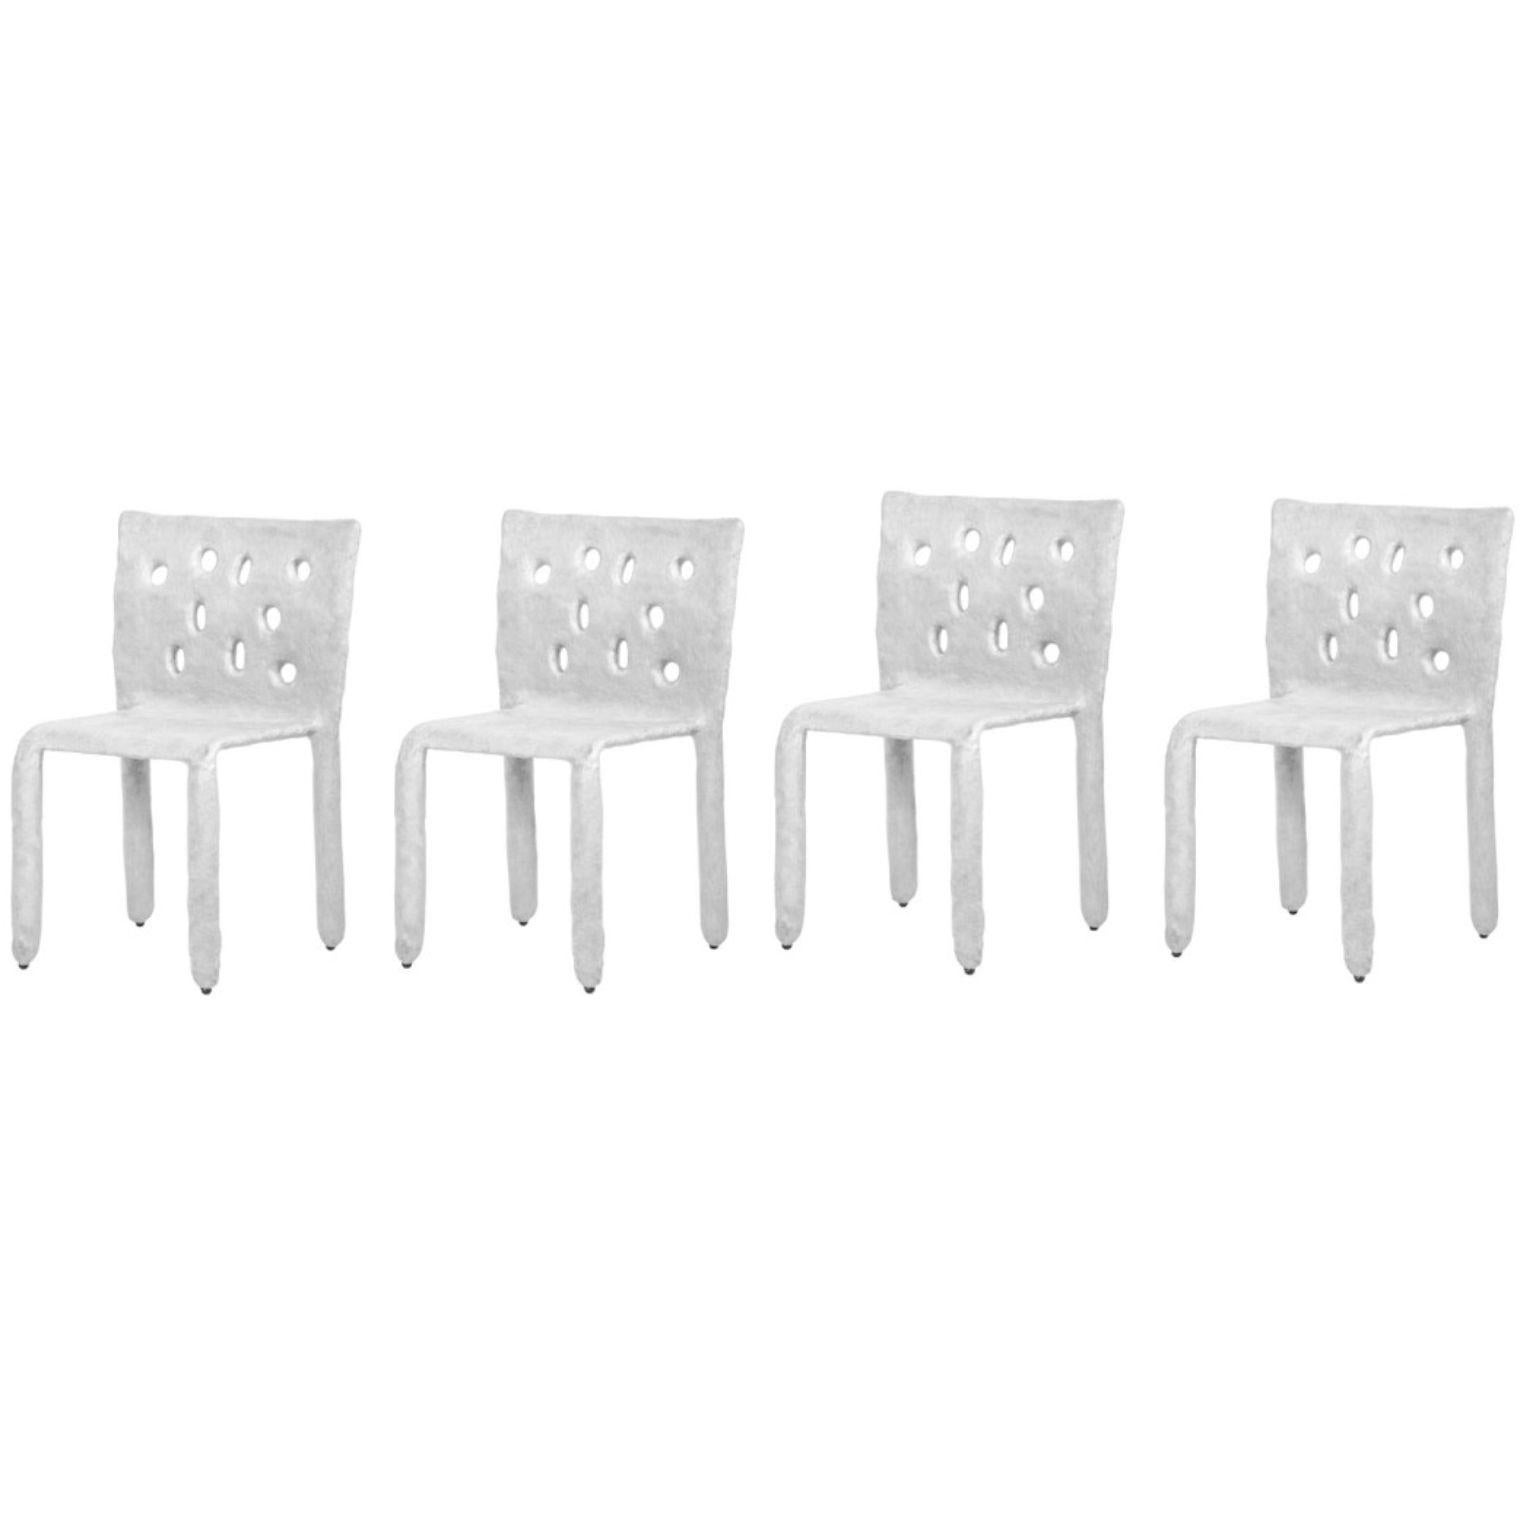 Set of 4 White Sculpted Contemporary Chairs by FAINA
Design: Victoriya Yakusha
Material: steel, flax rubber, biopolymer, cellulose
Dimensions: Height 82 x width 54 x legs depth 45 cm
 Weight: 15 kilos.

Made in the style of ethnic minimalism, the